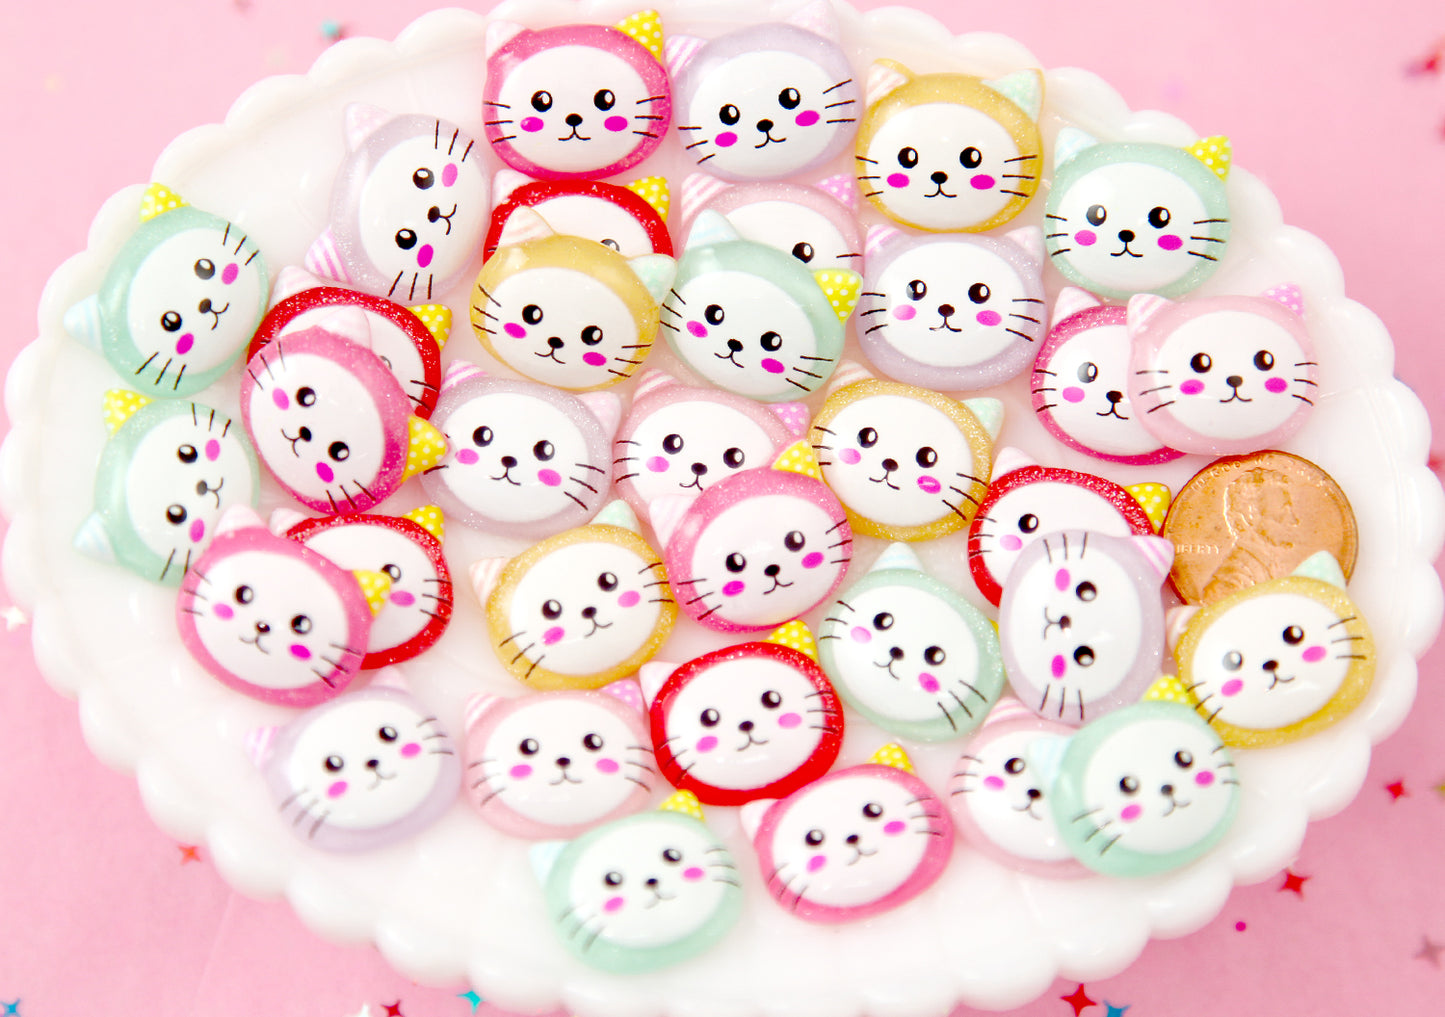 Kitty Cabochon - 20mm Colorful Kitty Cat Multi Color Flat Back Resin Cabochons - 12 pc set